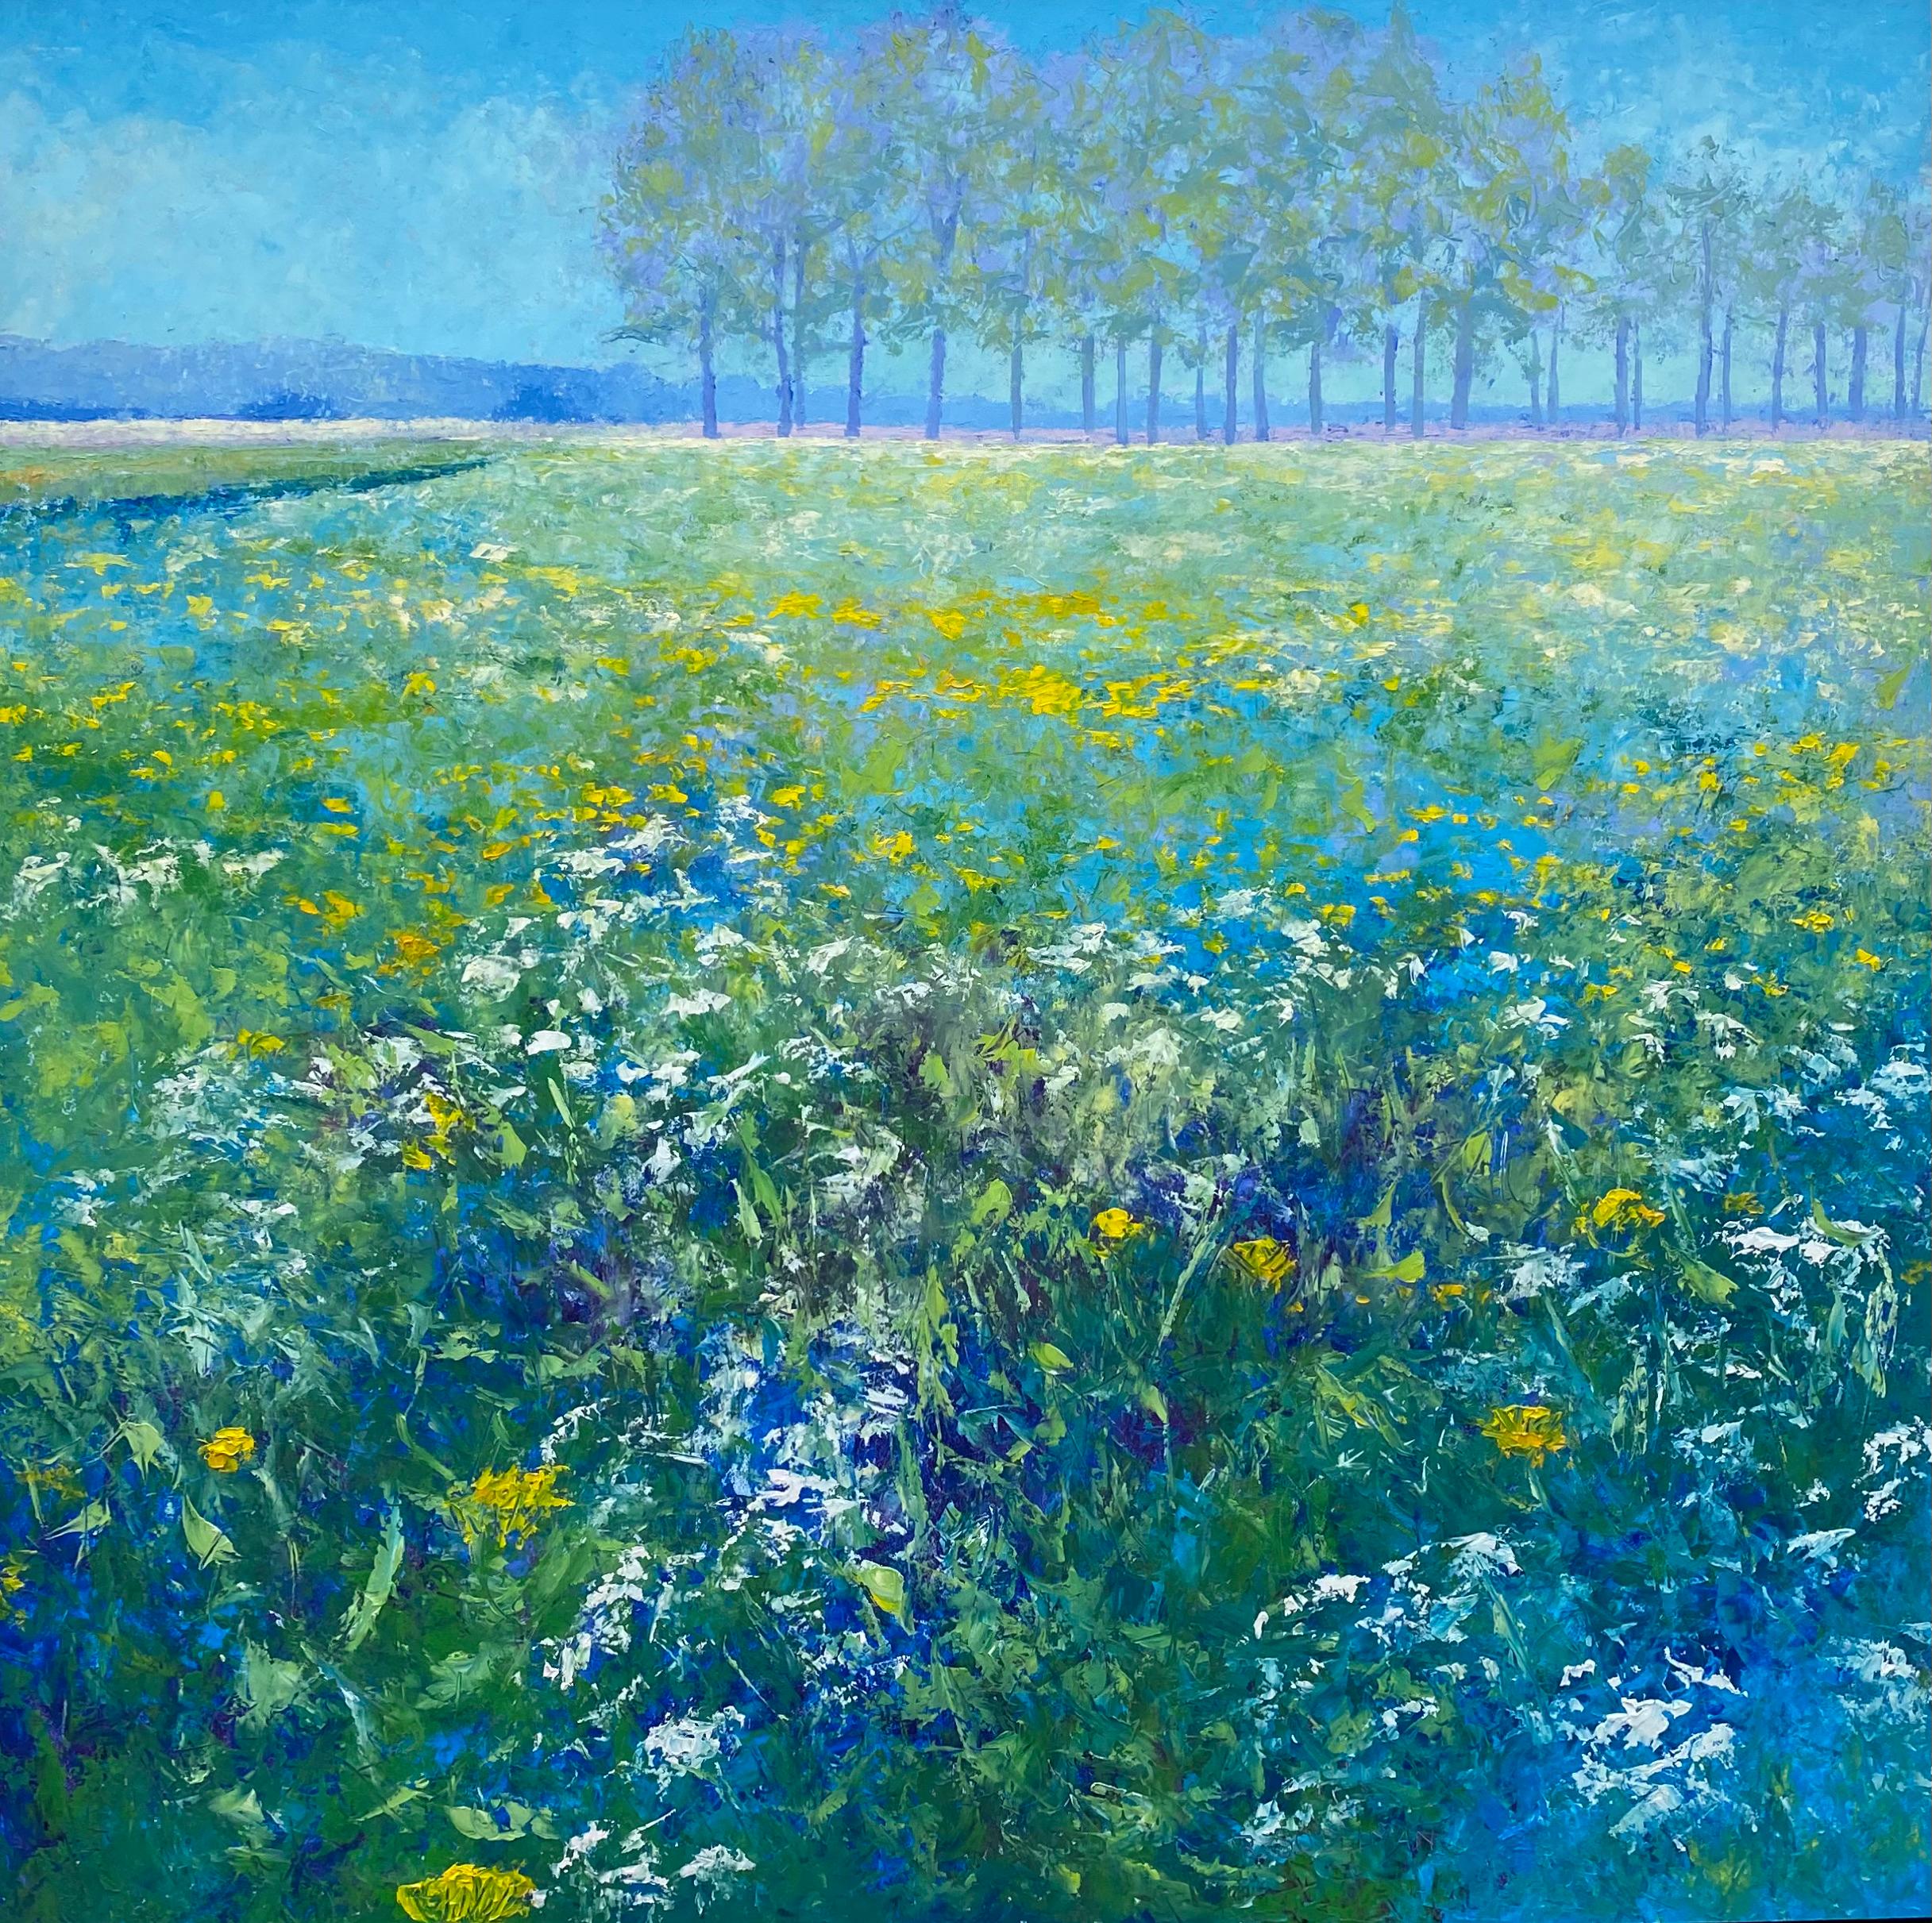 The Fields- 21st Century Contemporary Impressionistic Dutch Landscape Painting